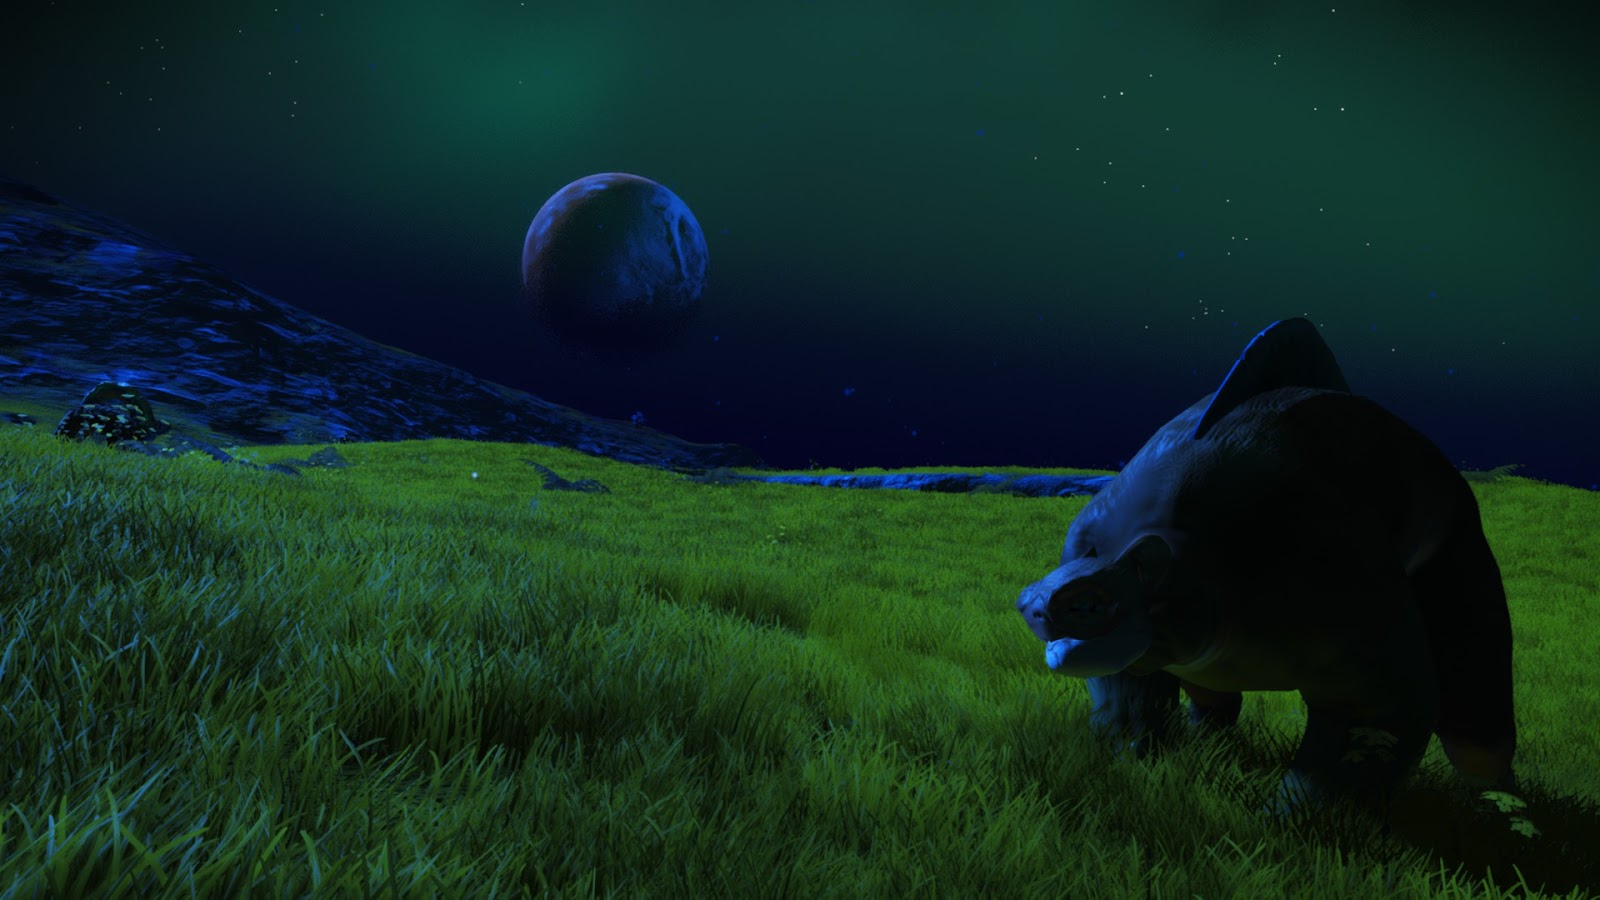 No Man’s Sky Players Are Marveling At The Lush New Grass